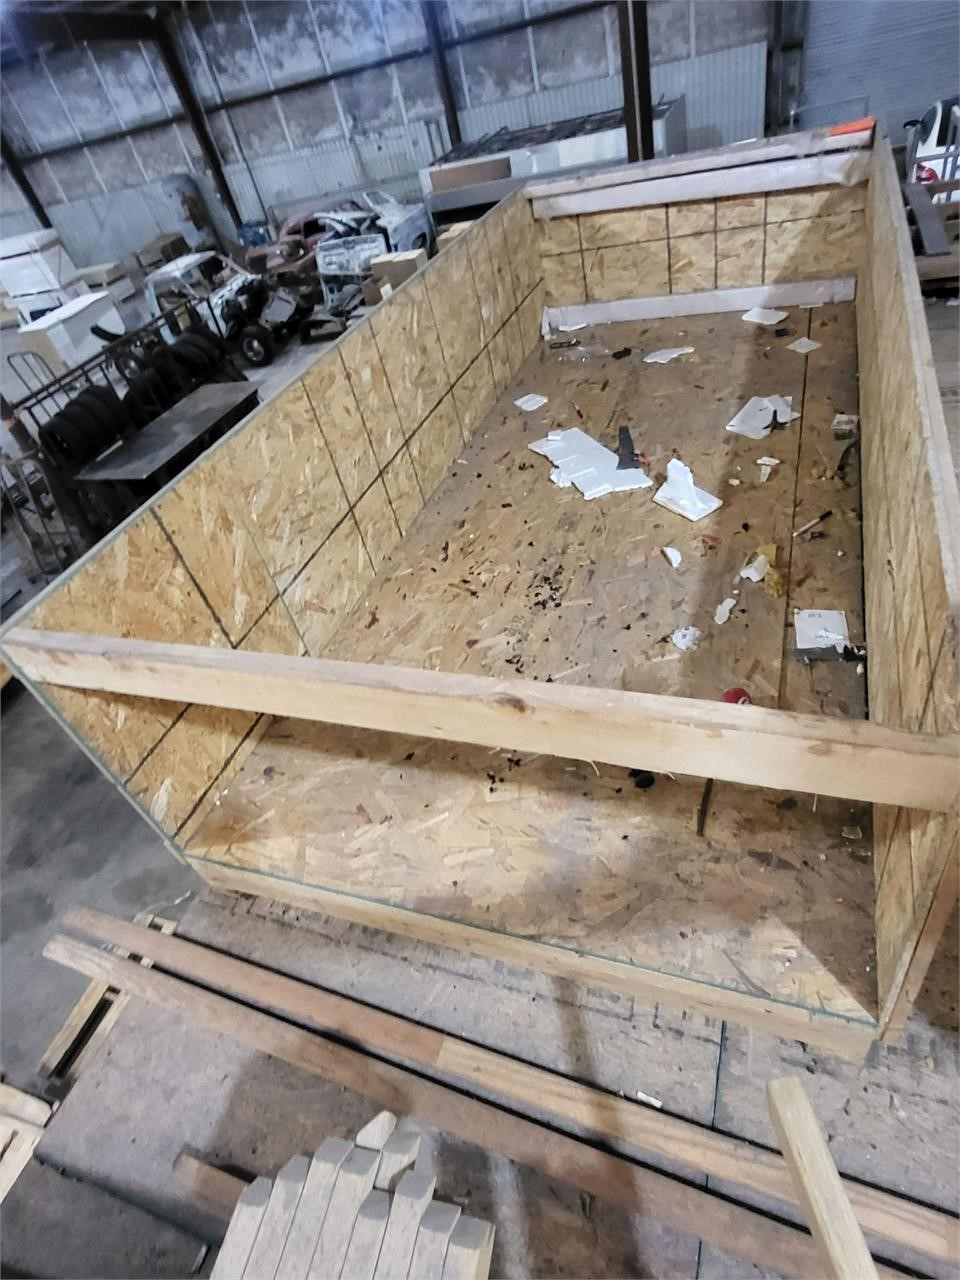 Huge wood shipping crate